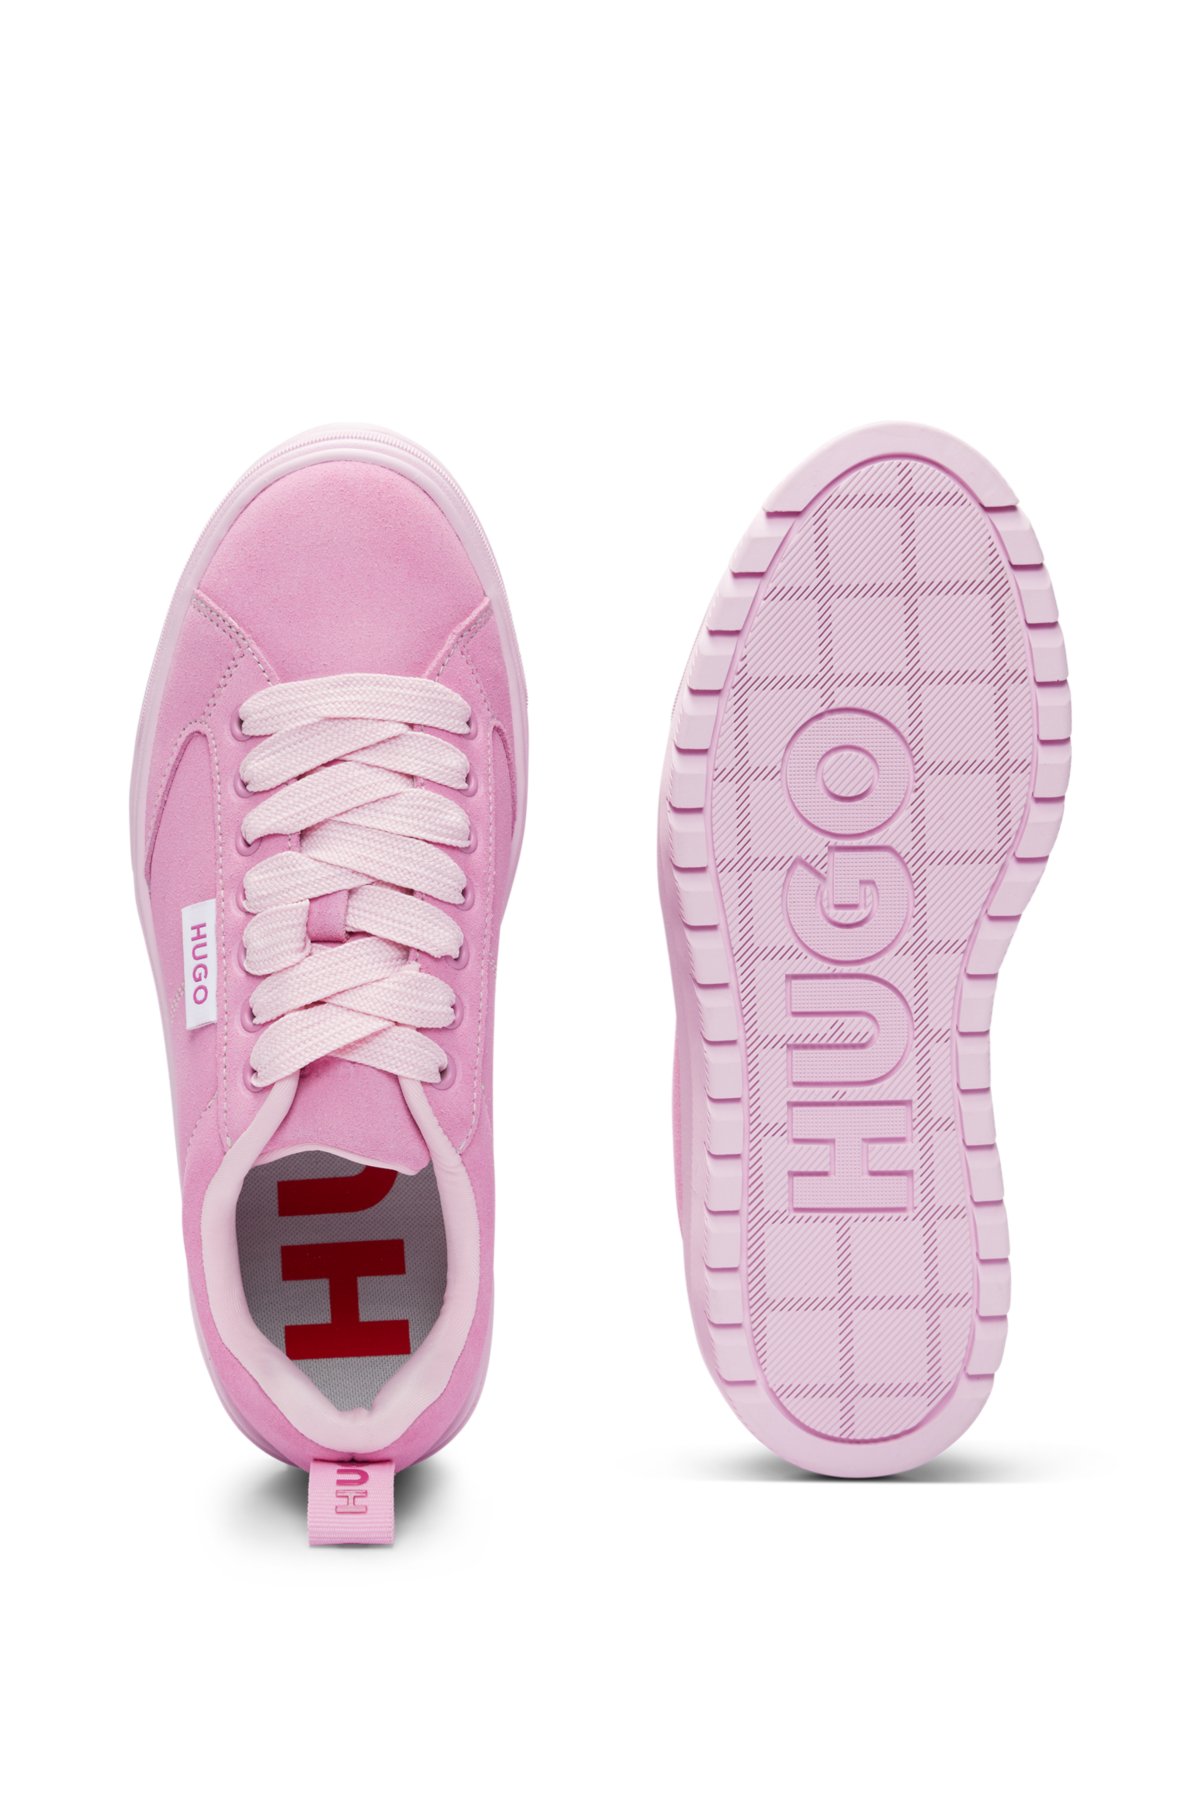 Suede trainers with rubber platform sole and logo flag, Pink